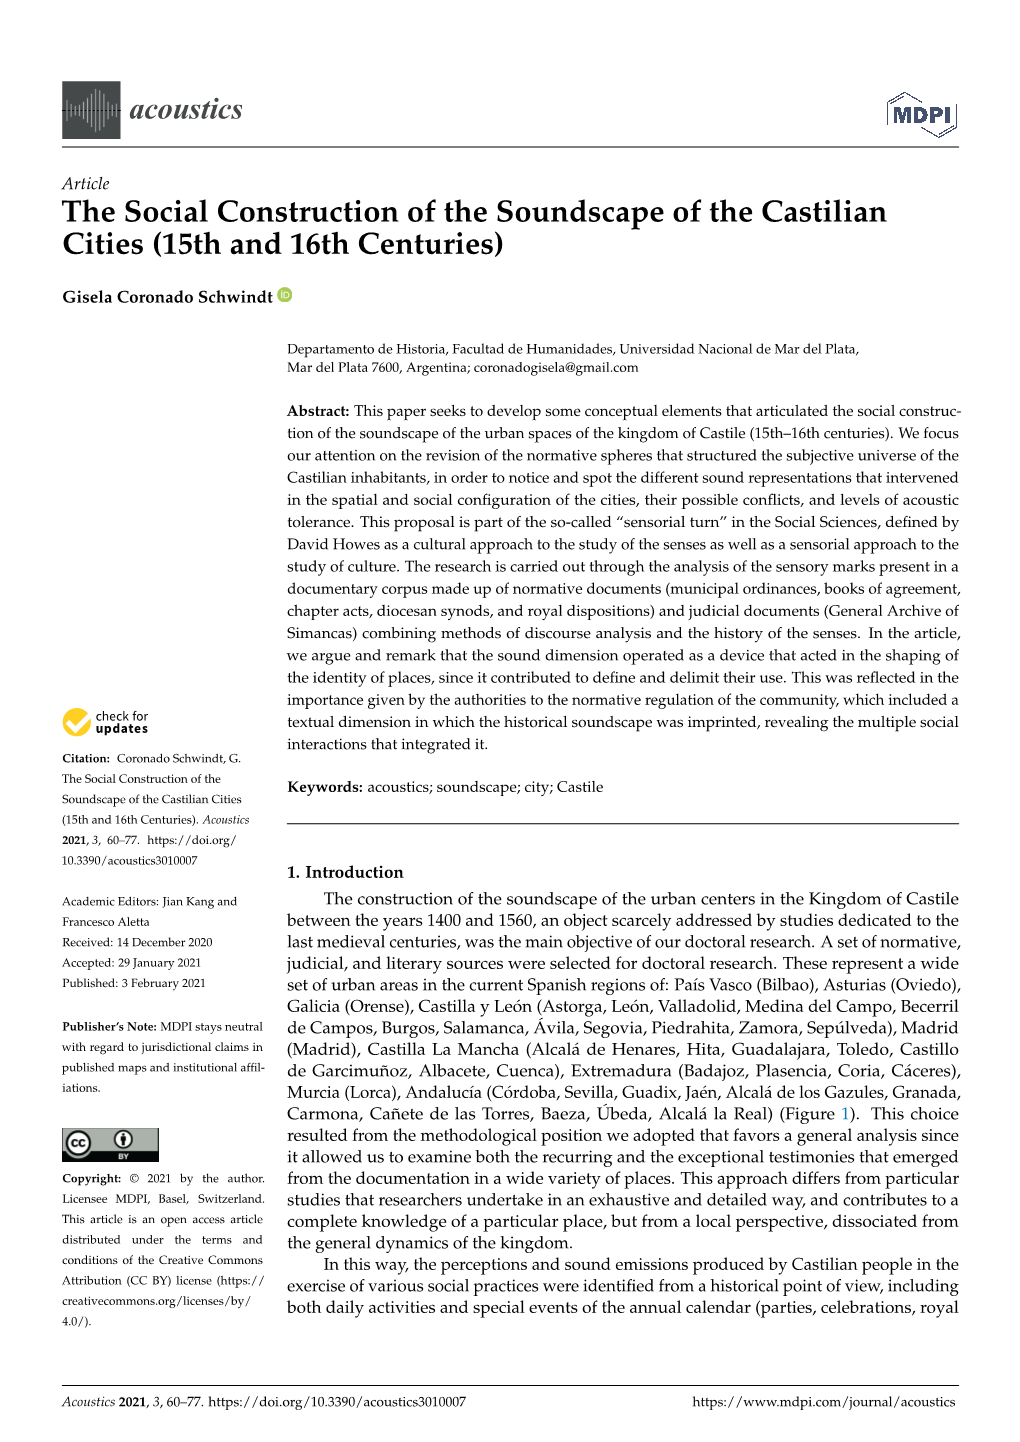 The Social Construction of the Soundscape of the Castilian Cities (15Th and 16Th Centuries)